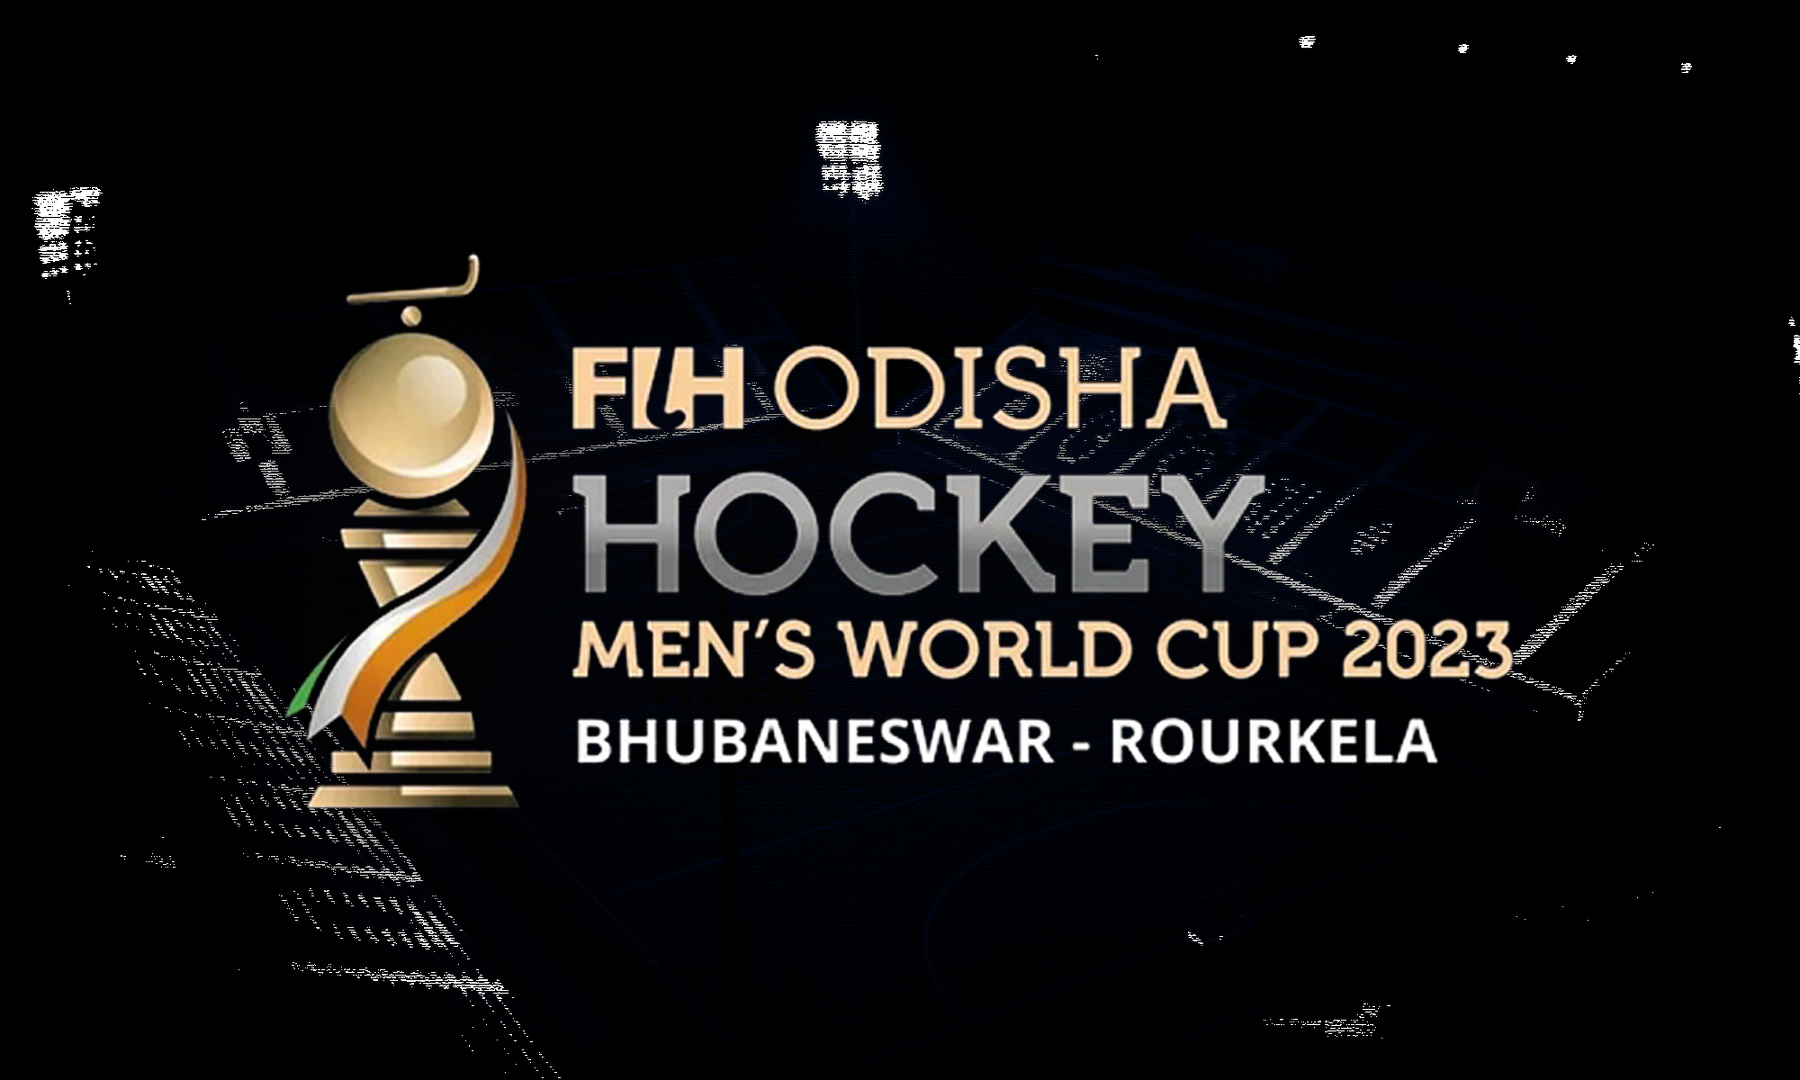 captains Men's Hockey World Cup 2023